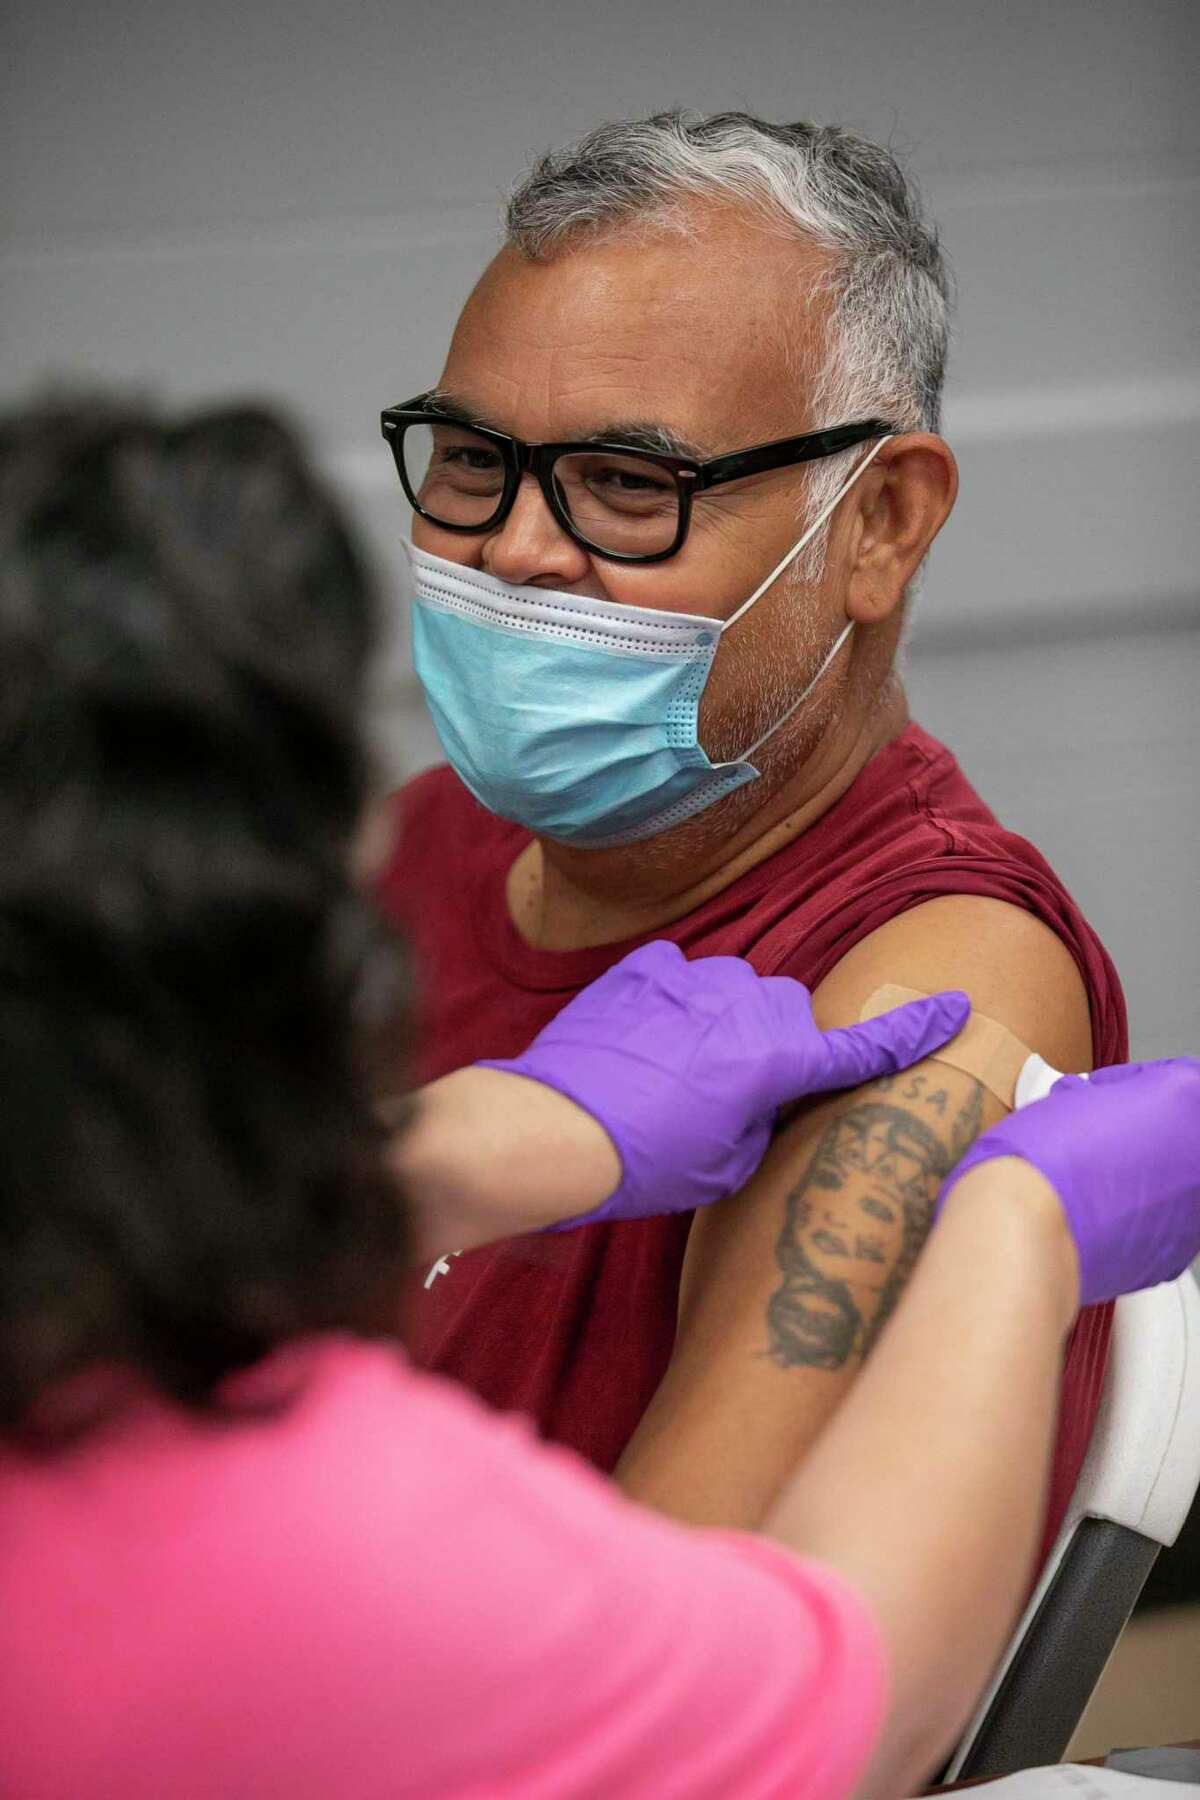 Frank Garret gets vaccinated at a Metro Health vaccination pop-up at the Frank Garrett Multi-Service Center San Antonio in TX, on Sept. 16, 2022. As vaccines become more readily available from commercial pharmacies throughout the city and the pandemic drags on, Metro Health has also shut down their mass vaccine sites and only offers few pop-up sites, one of which had long waits in line to get vaccinated in a limited capacity.